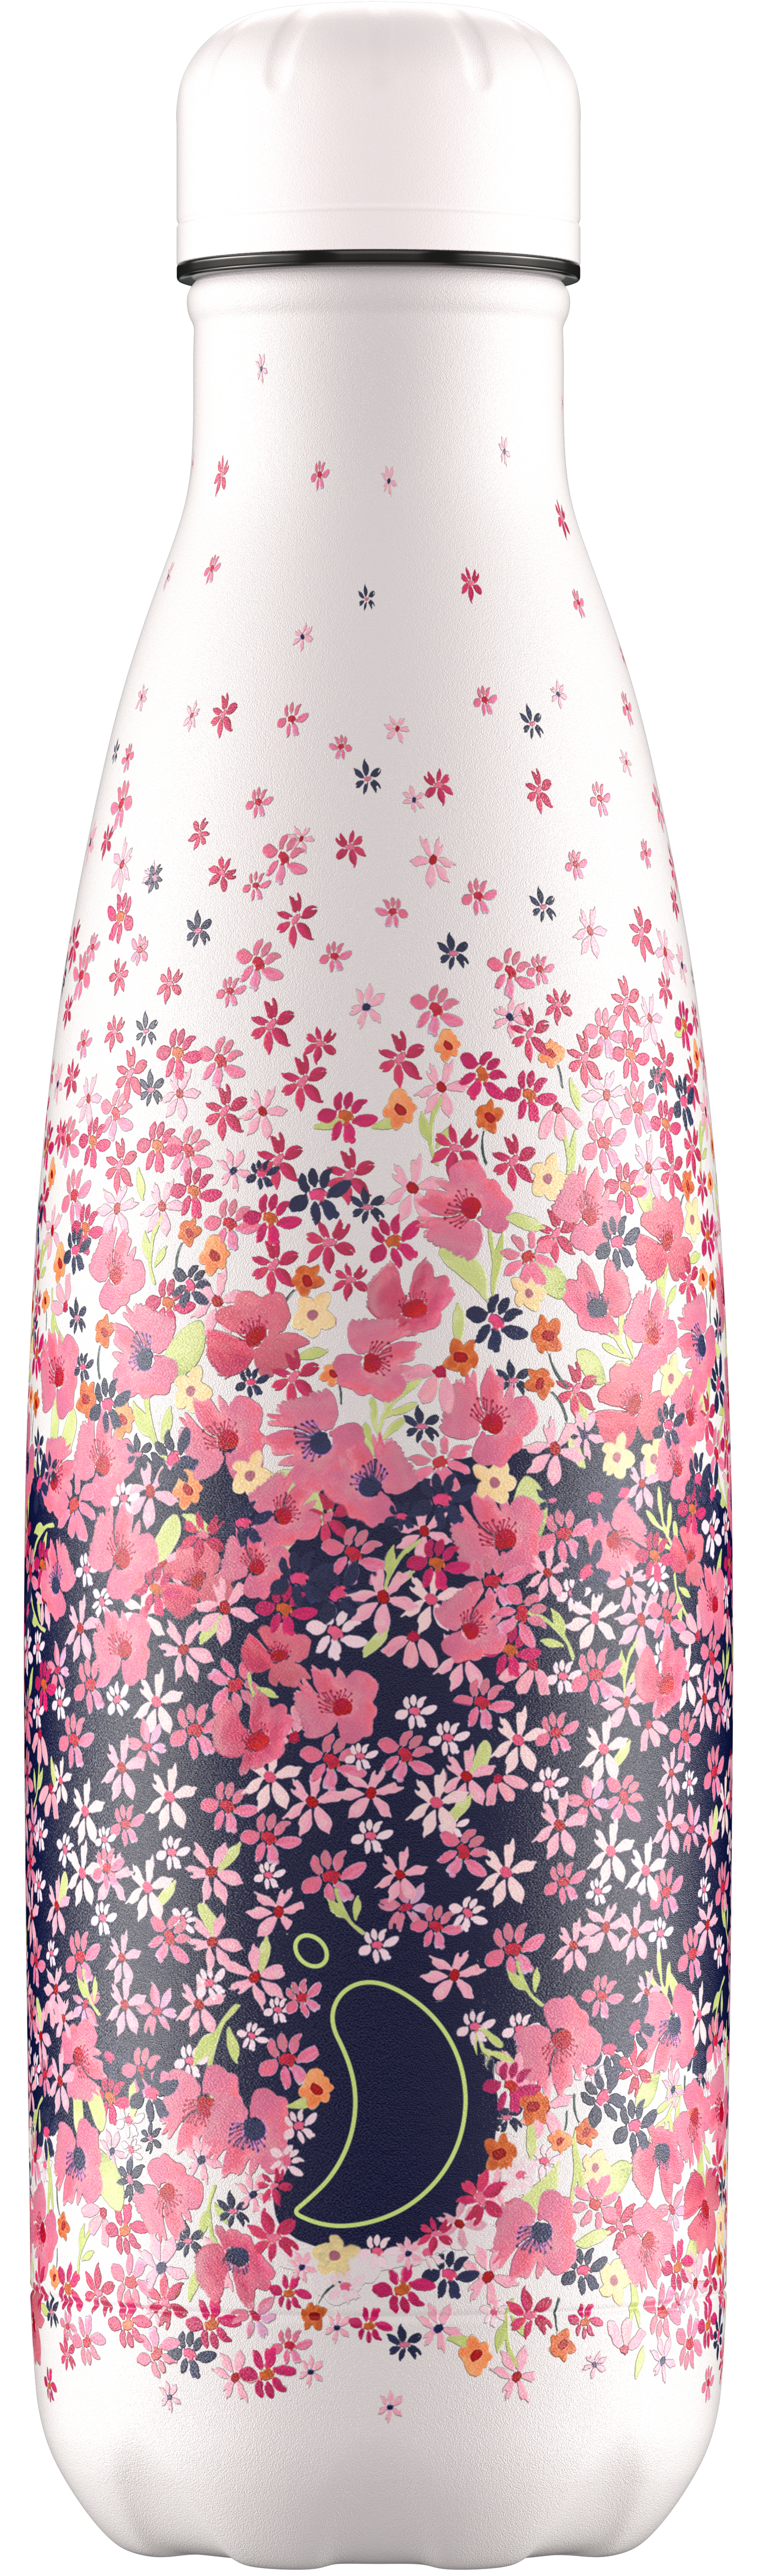 chilly's floral edition ombre ditsy blossom pattern